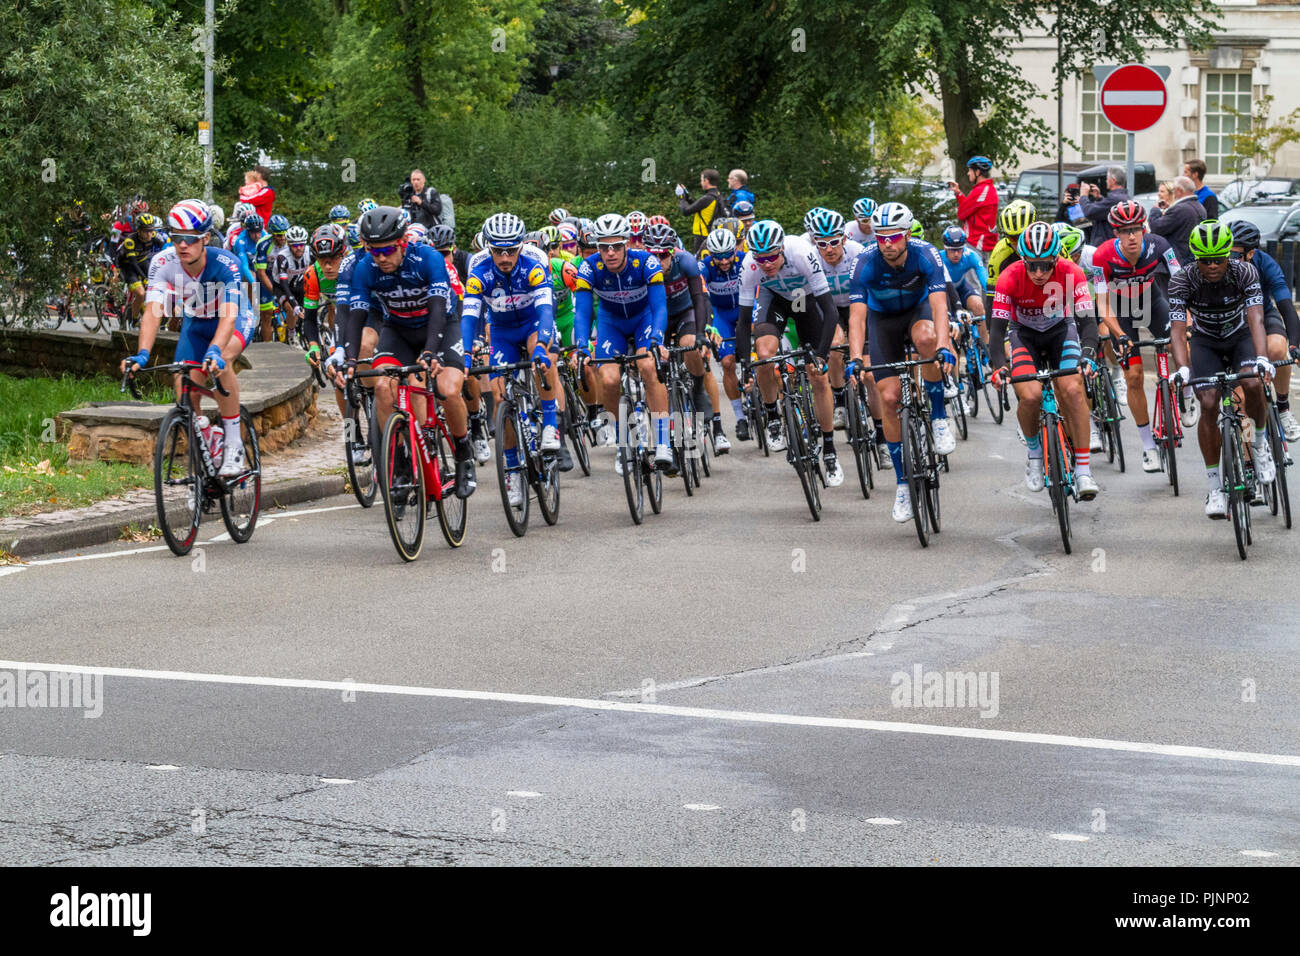 West Bridgford, Nottingham, UK. 8th September 2018. The Tour of Britain passing through West Bridgford, Nottingham, just after the start of the cycle race.  Credit: Martyn Williams/Alamy Live News Stock Photo